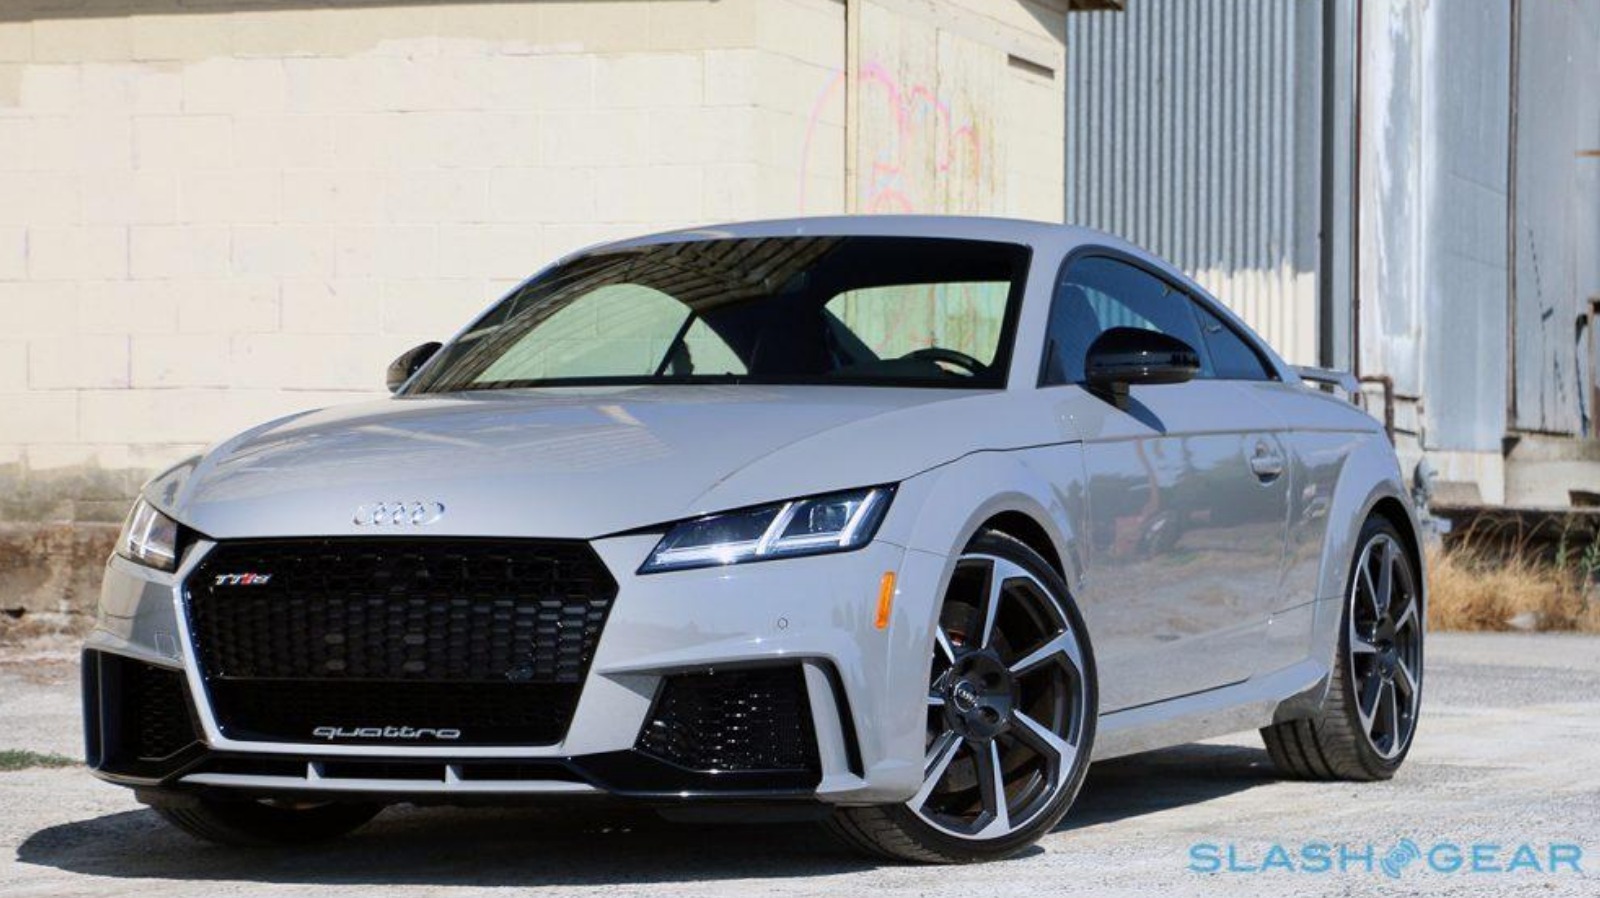 2018 Audi TT RS Review: The Best Luxury Sports Car For The Money